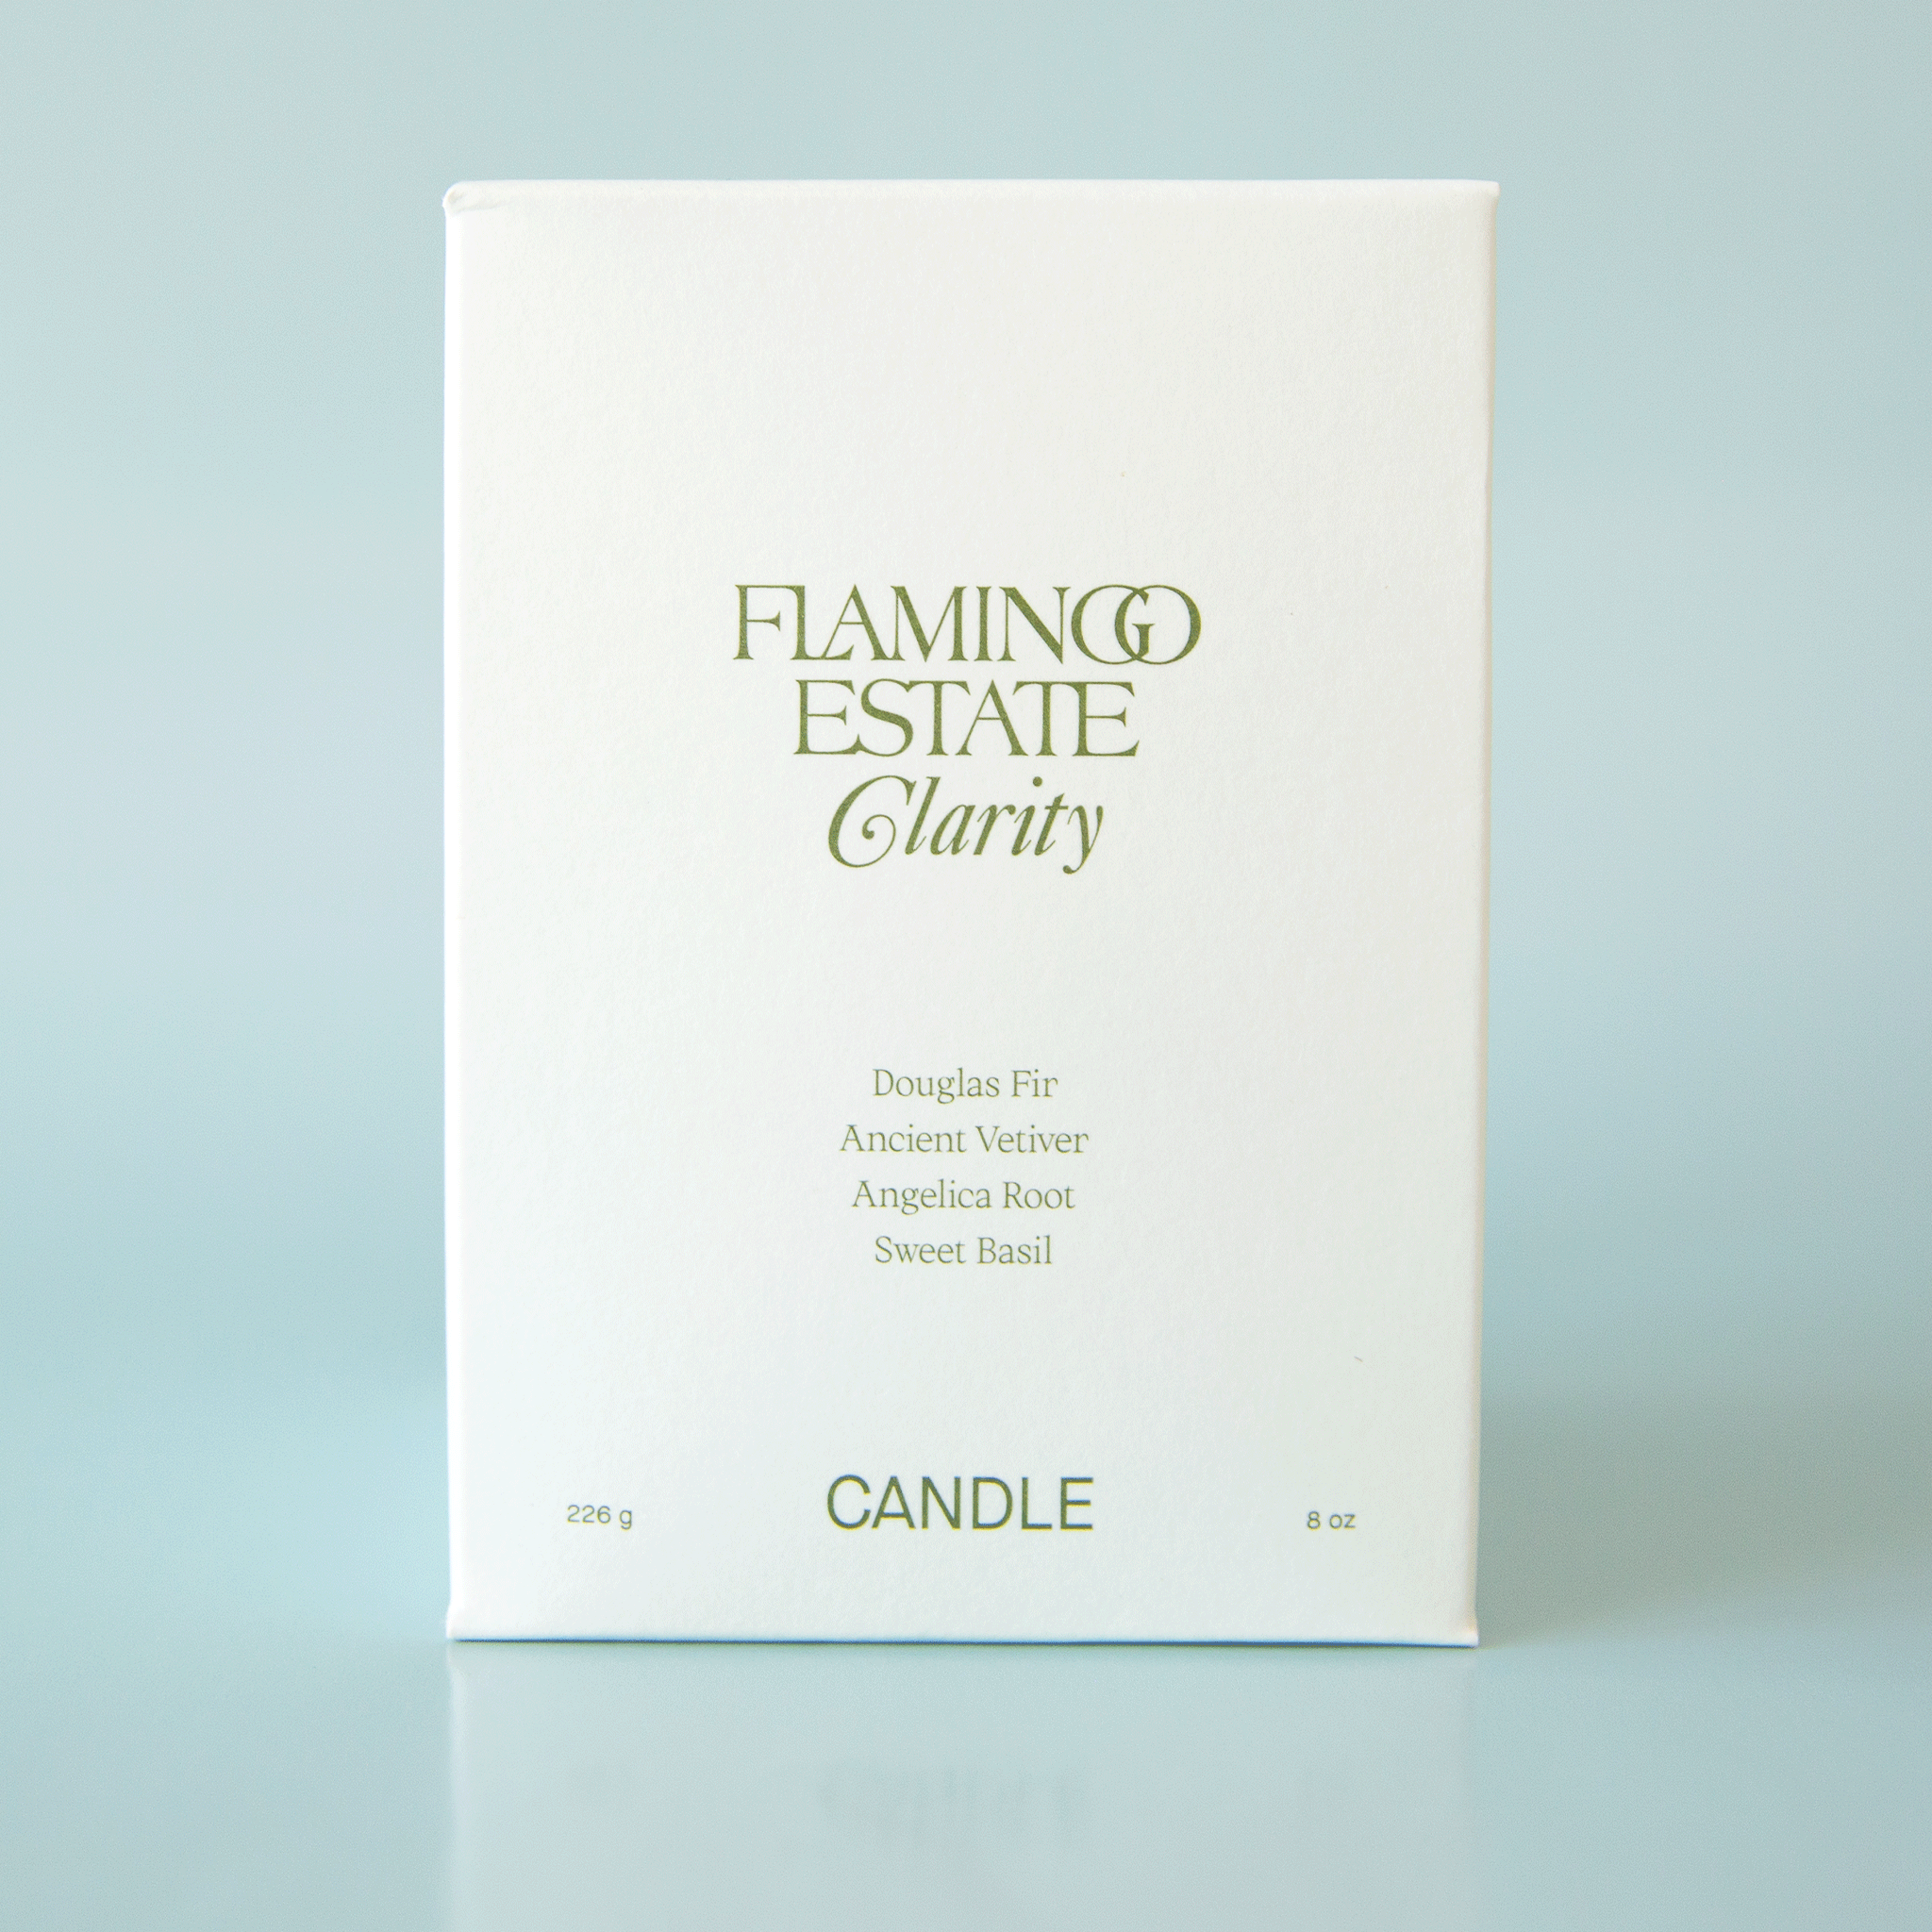 On a blue background is a box containing a green glass candle. The front of the box has green text that reads, "Flamingo Estate Clarity Douglas Fir Ancient Vetiver Angelica Root Sweet Basil".